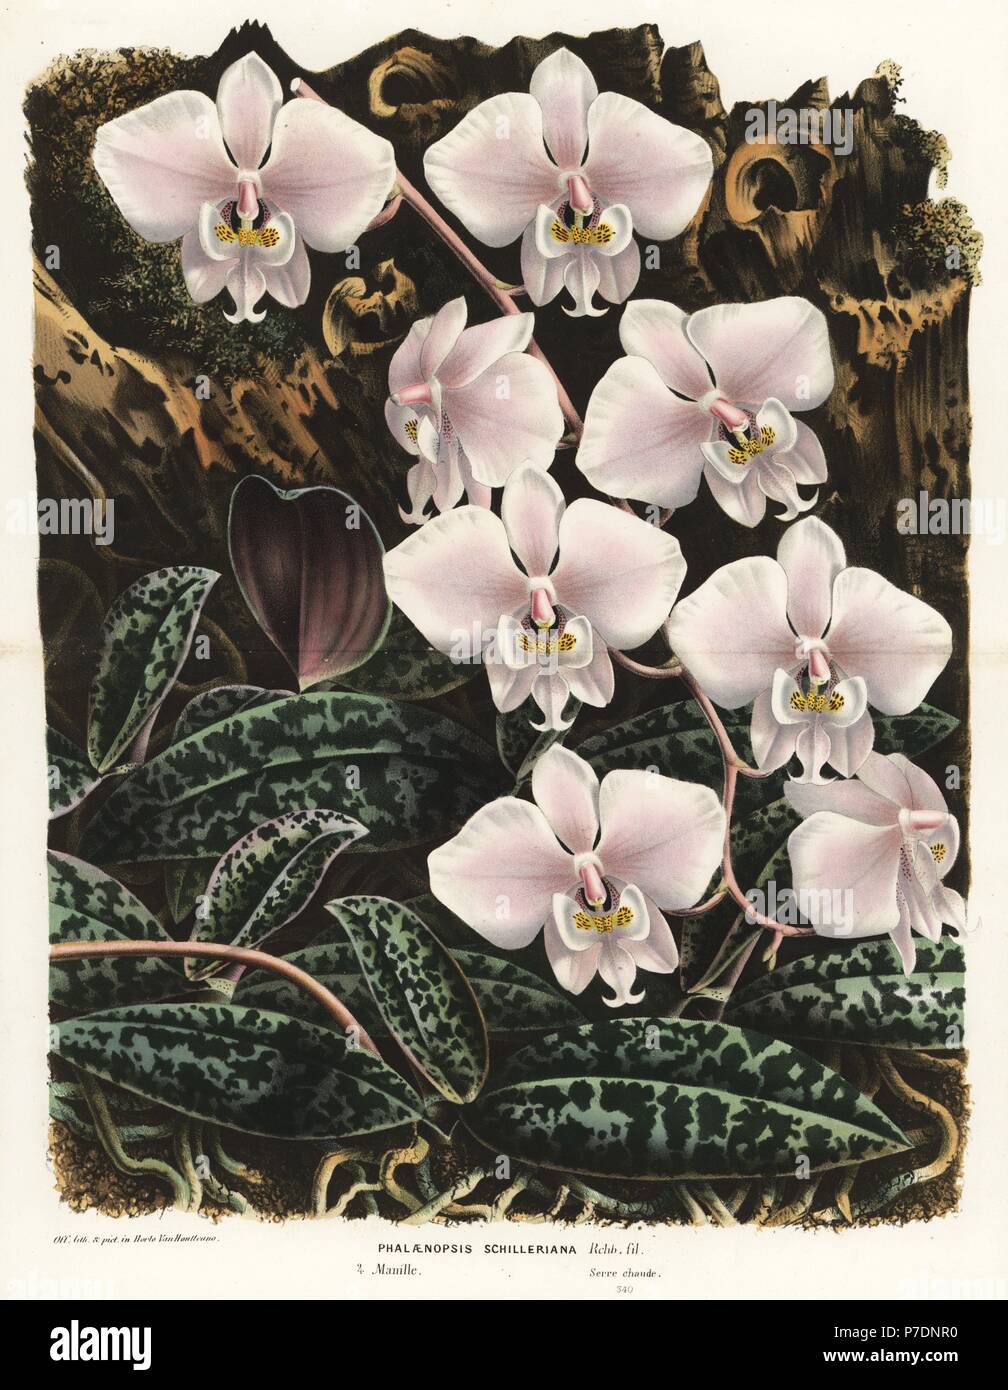 Moth orchid, Phalaenopsis schilleriana. Handcoloured lithograph from Louis van Houtte and Charles Lemaire's Flowers of the Gardens and Hothouses of Europe, Flore des Serres et des Jardins de l'Europe, Ghent, Belgium, 1862-65. Stock Photo